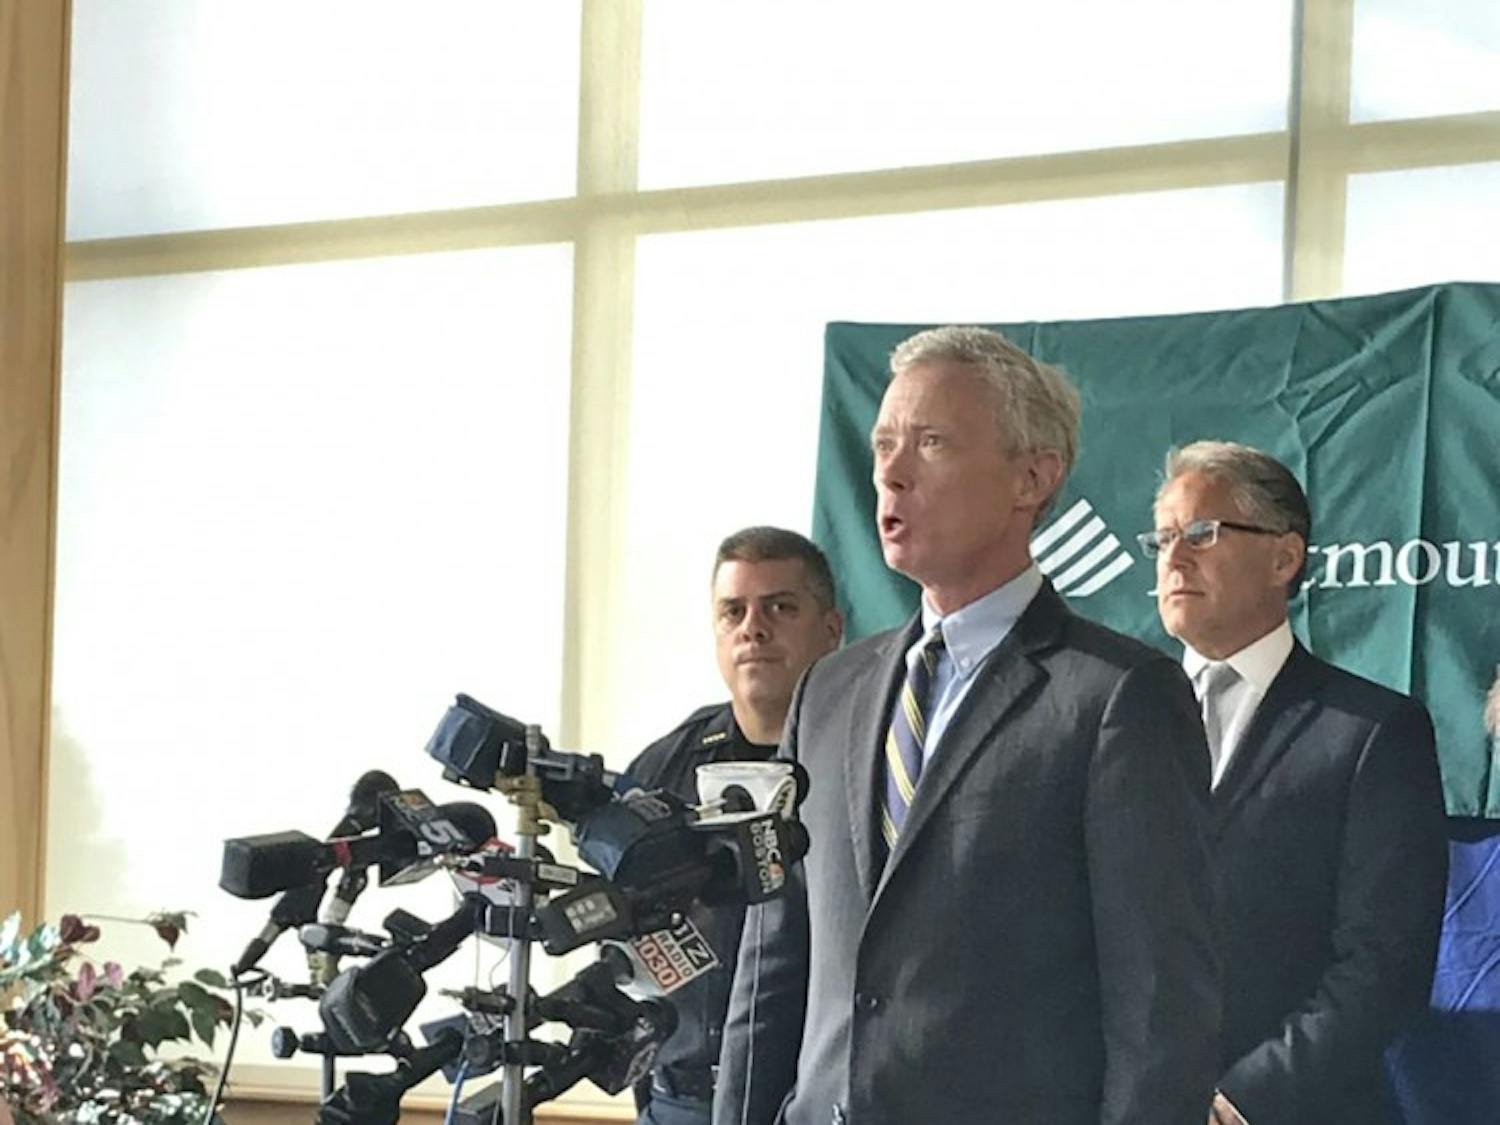 New Hampshire Attorney General Gordon MacDonald&nbsp;'83 held a press conference at Dartmouth-Hitchcock Medical Center Tuesday afternoon.